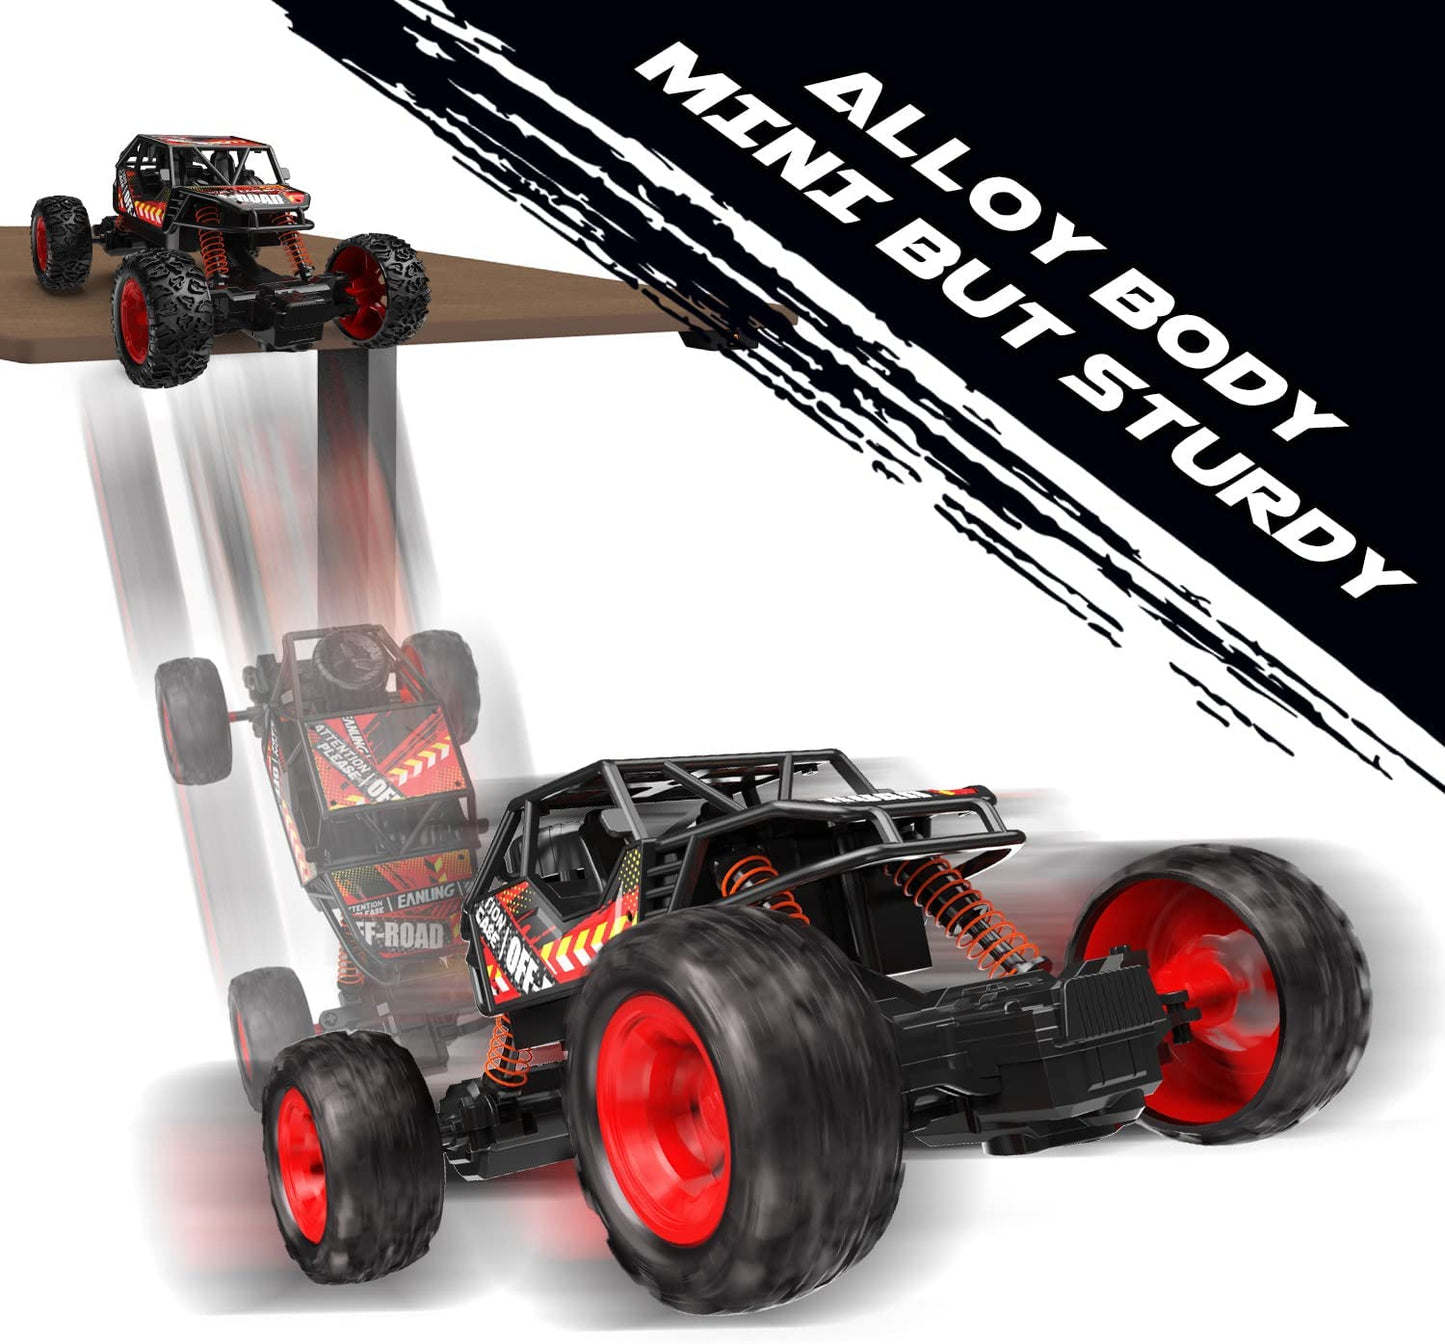 DE66 Rc Cars for Kids 2WD Remote Control Car 2 Batteries Alloy Monster Trucks 60Mins Play Time 175 FT Control Distance Electric Toy Off-Road Crawler Gift for Boys and Girls.